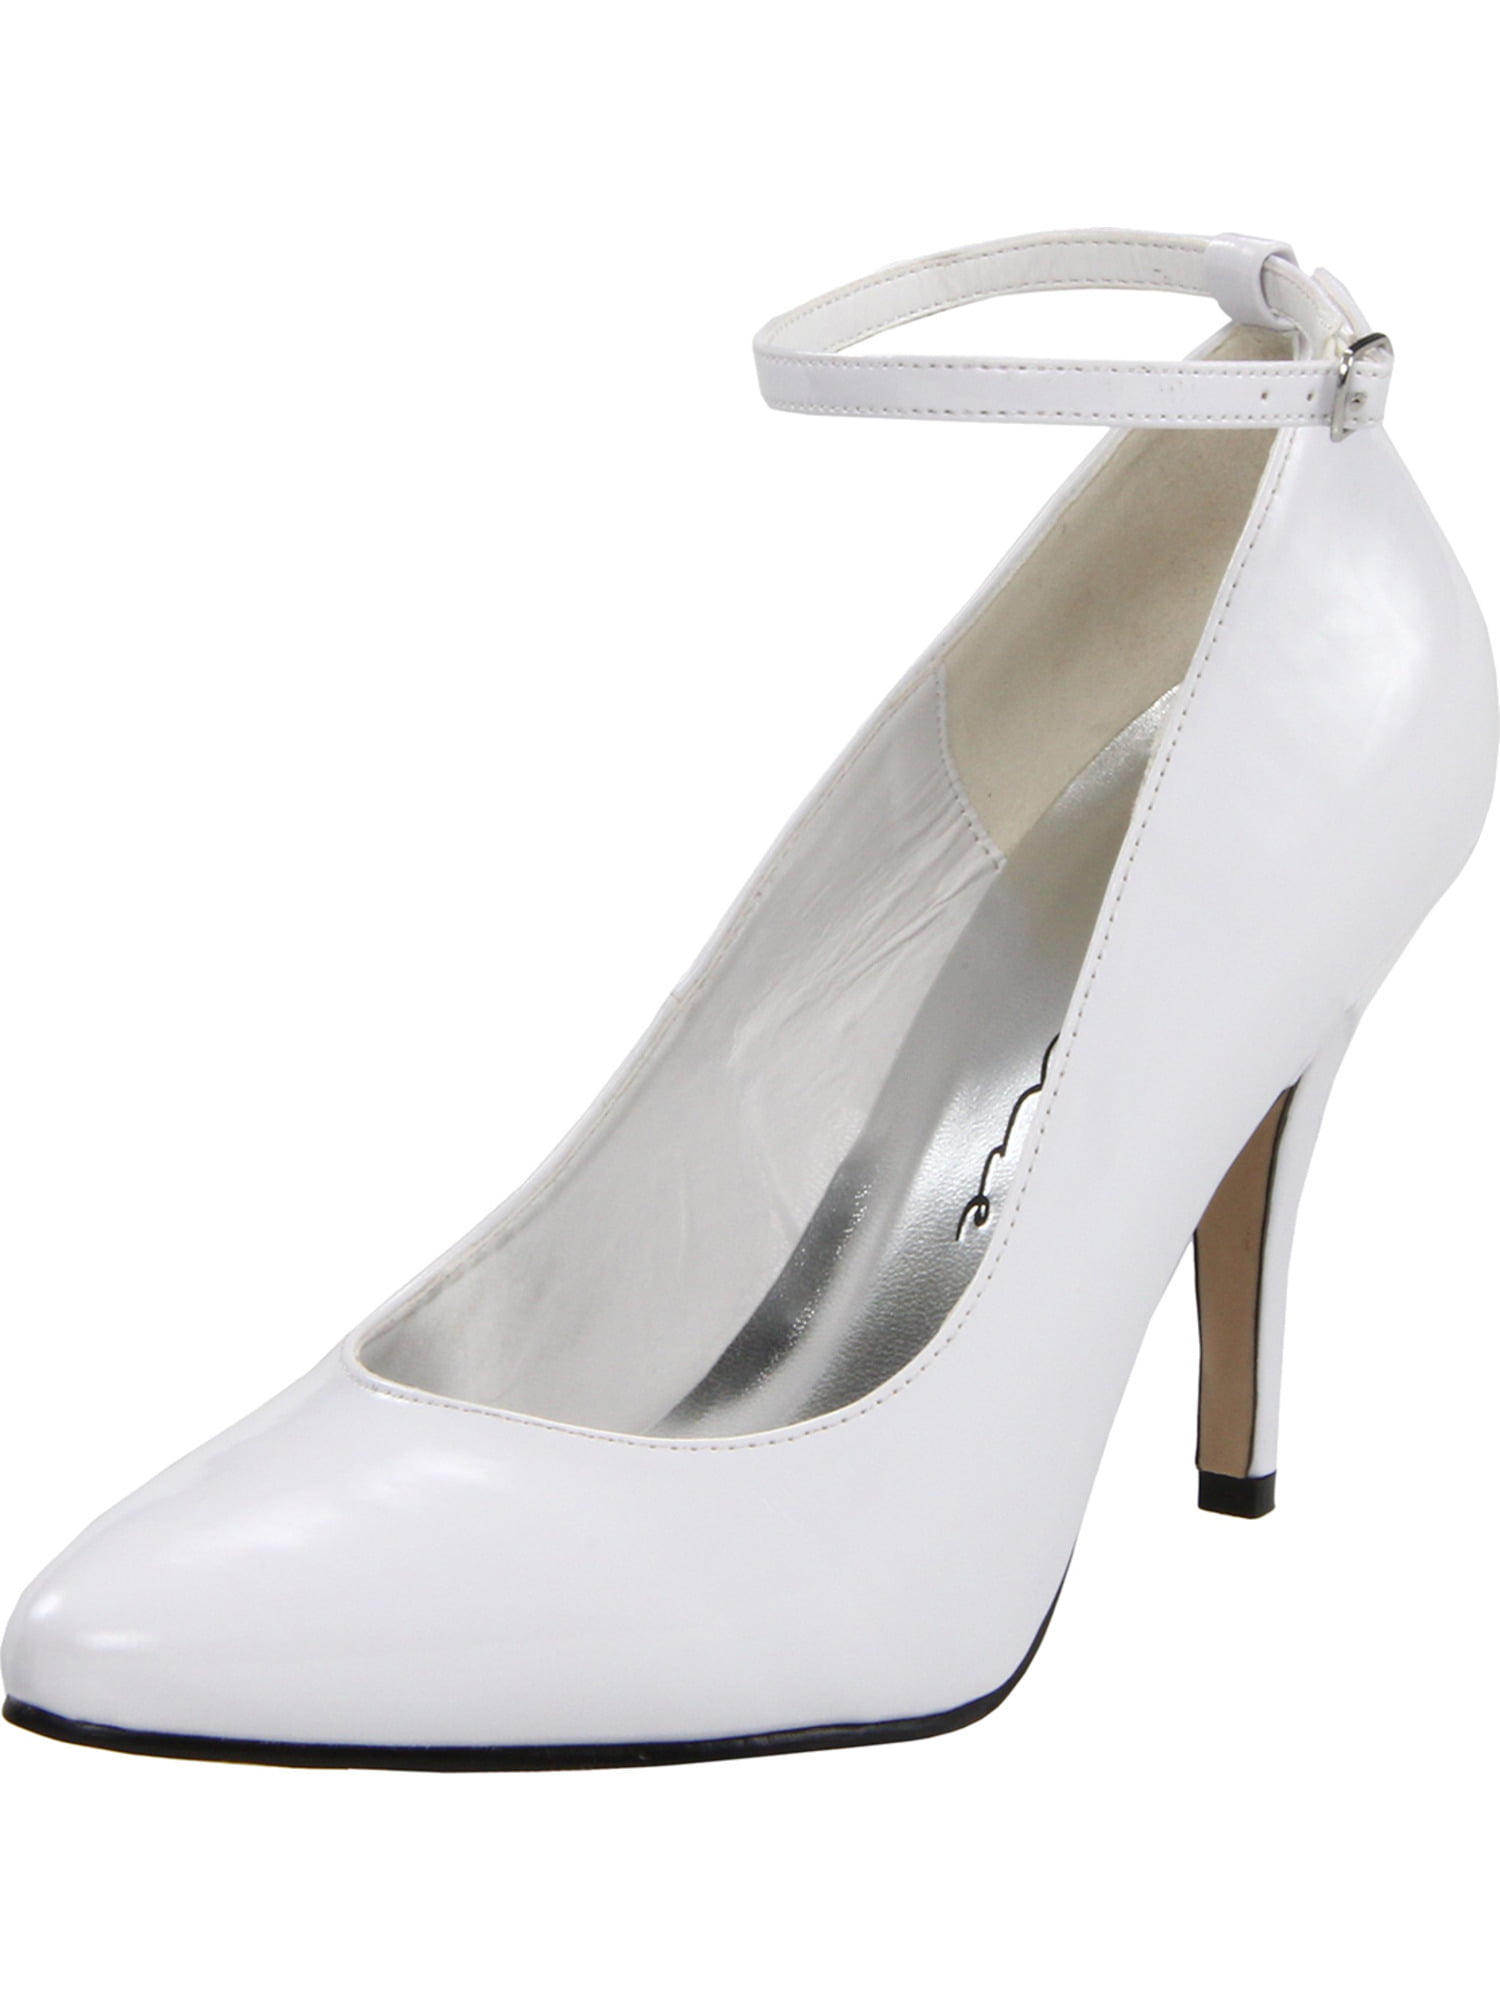 Womens Pointed Toe Pumps Black or White 